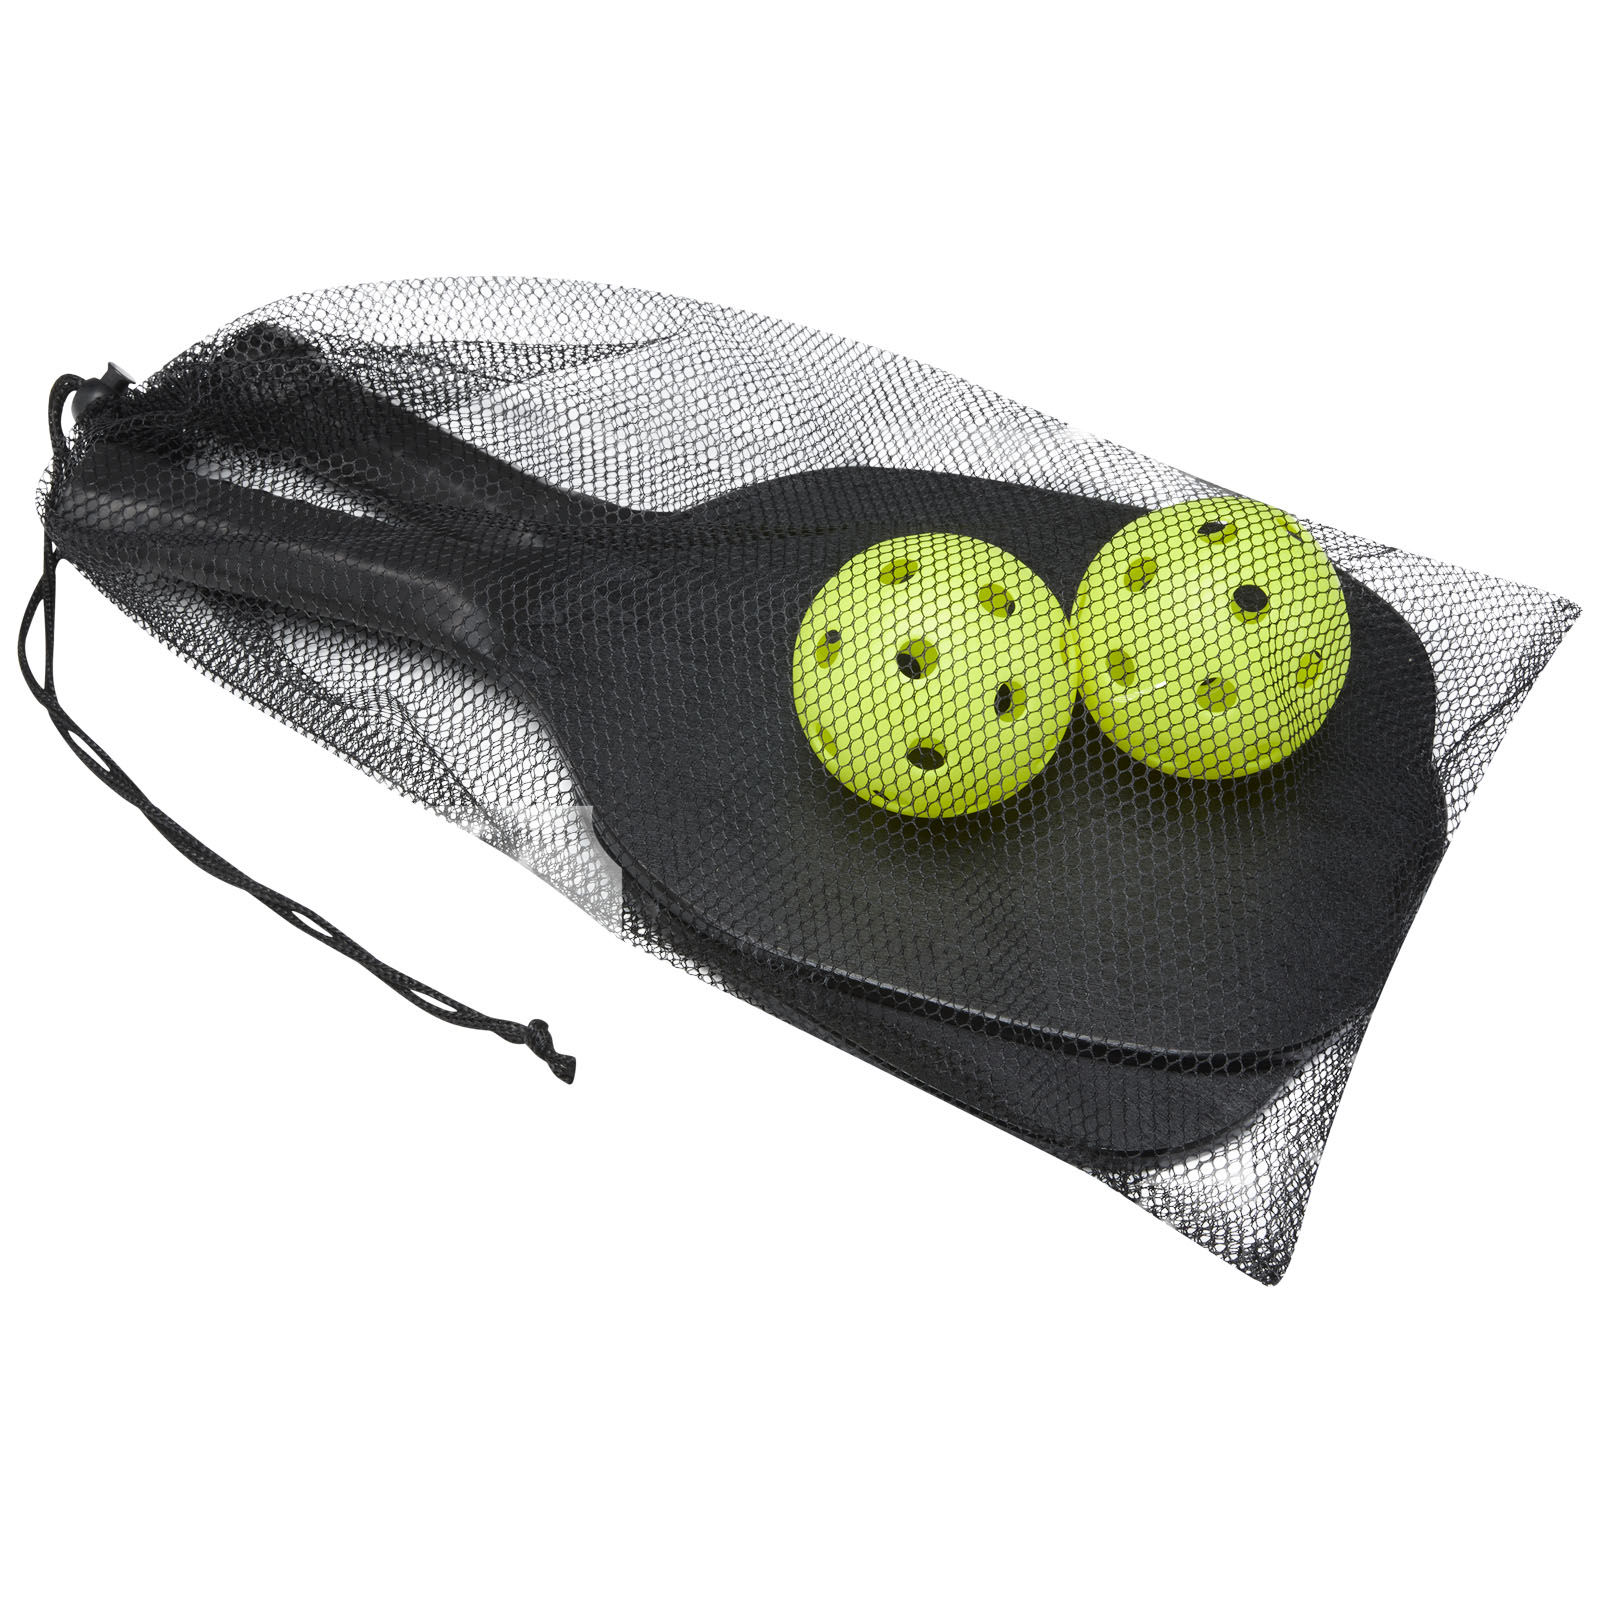 Advertising Outdoor Games - Enrique paddle set in mesh pouch